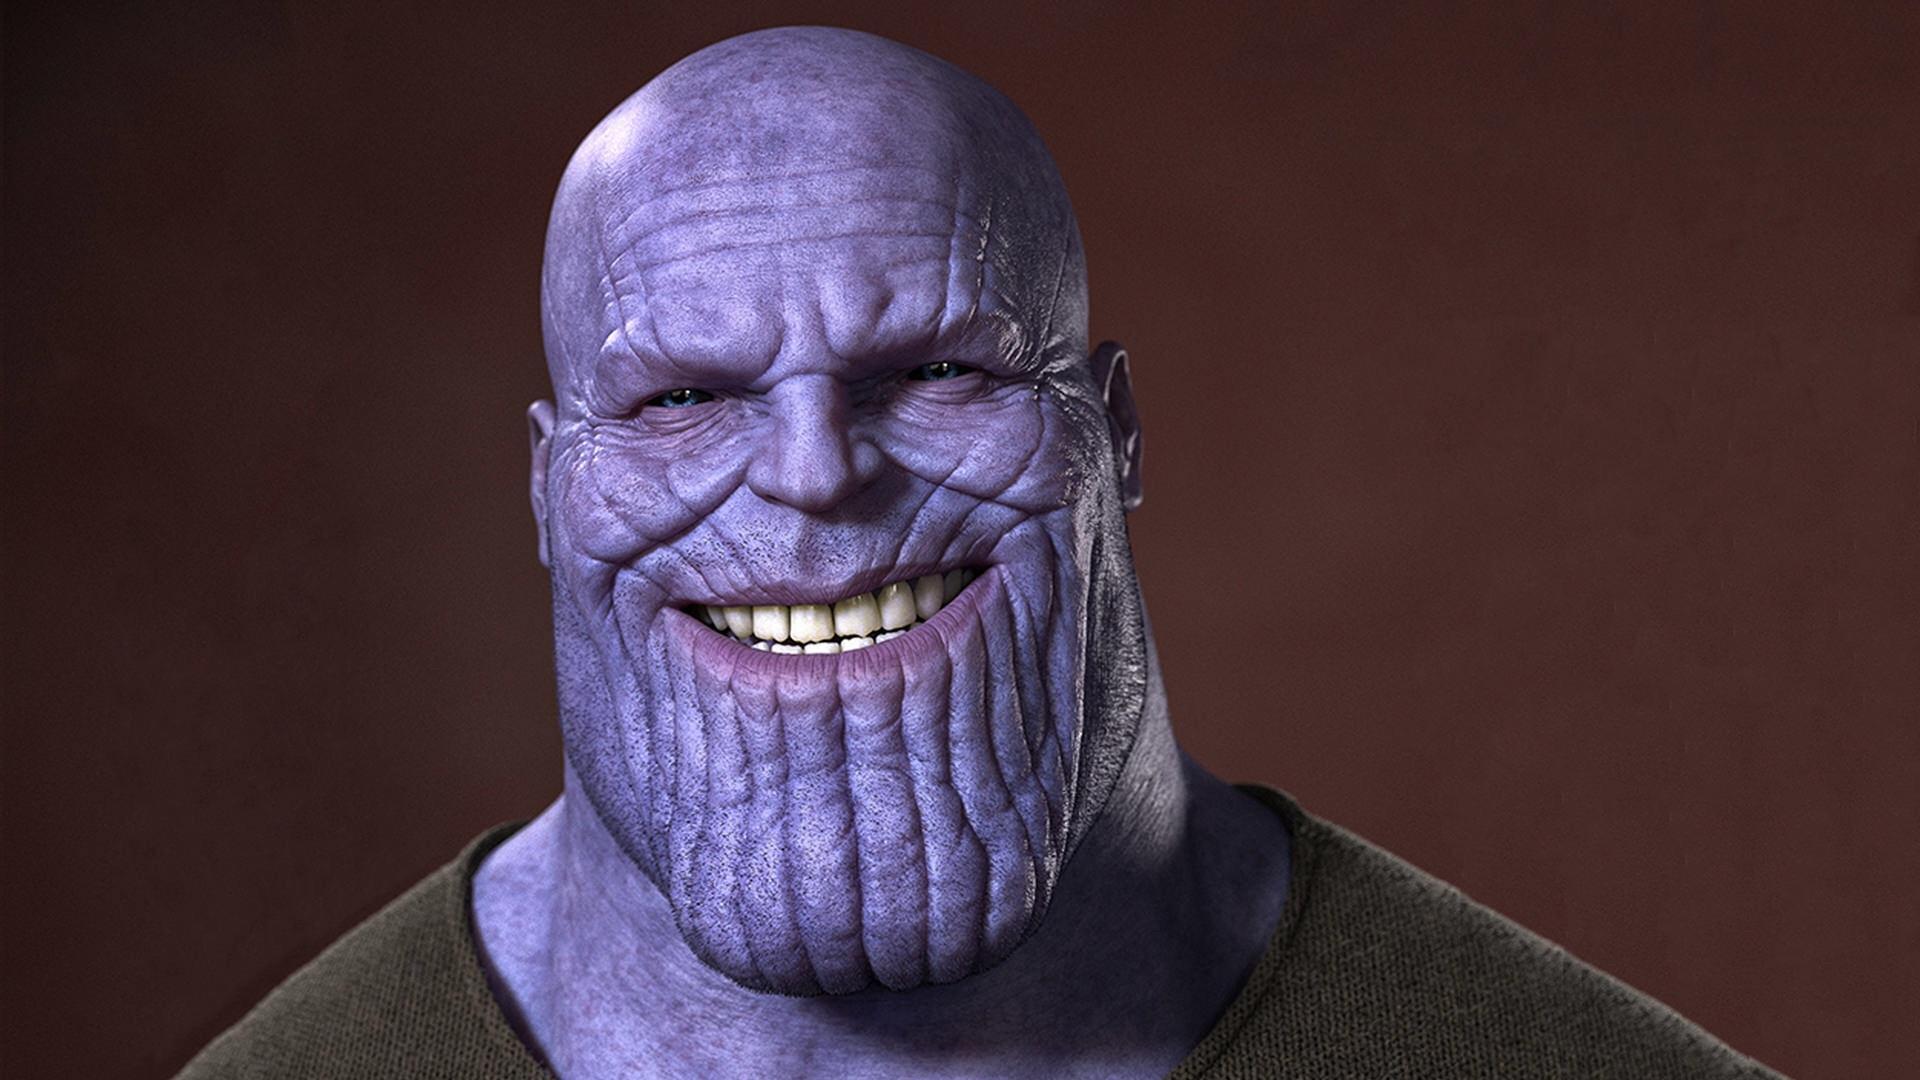 Thanos Revives Centuries Old Debate About Overpopulation